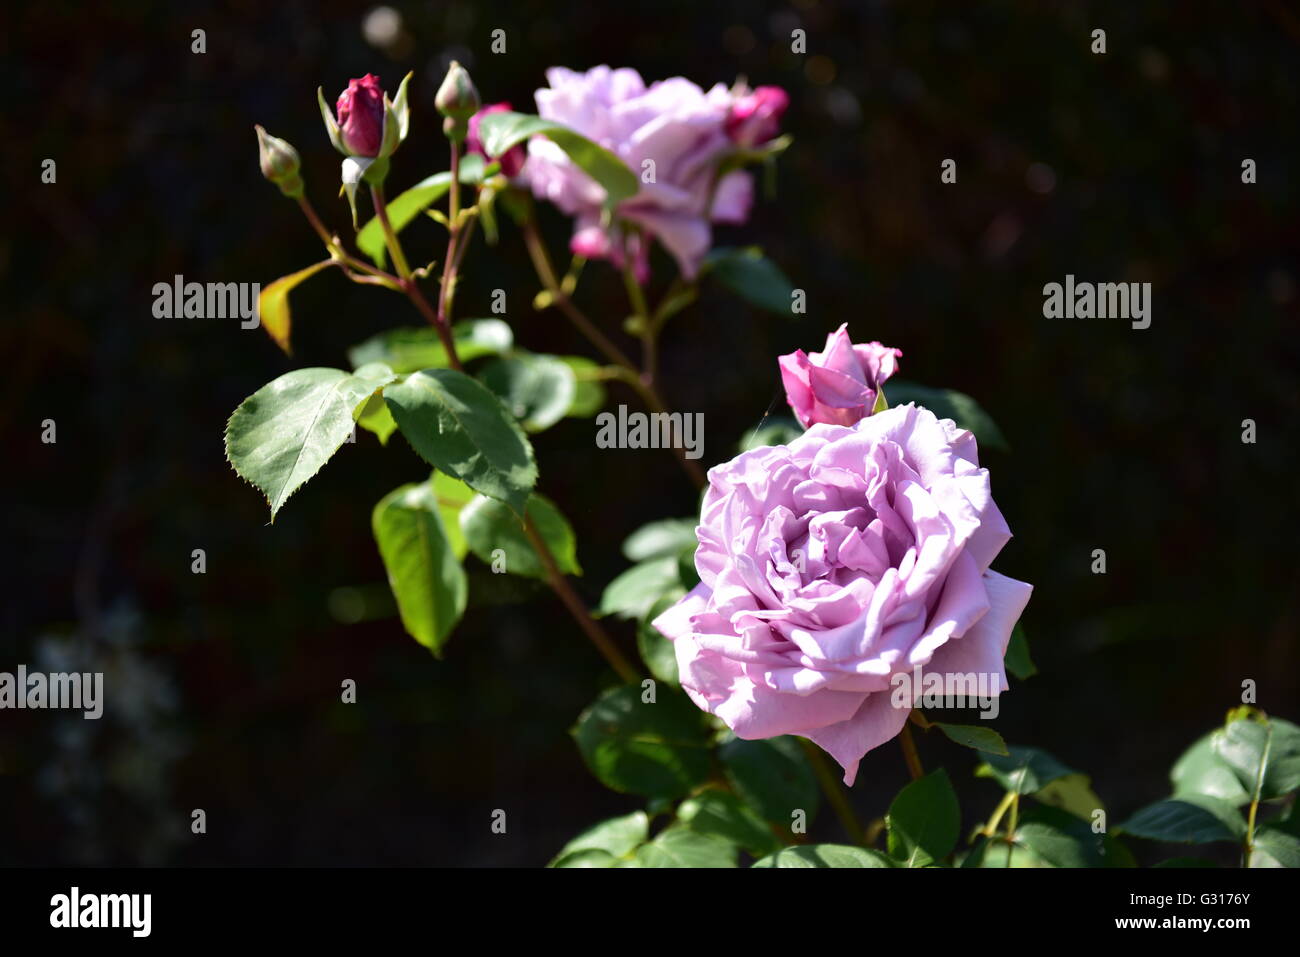 Blue rose growing in a terracotta container outside in a garden Stock Photo